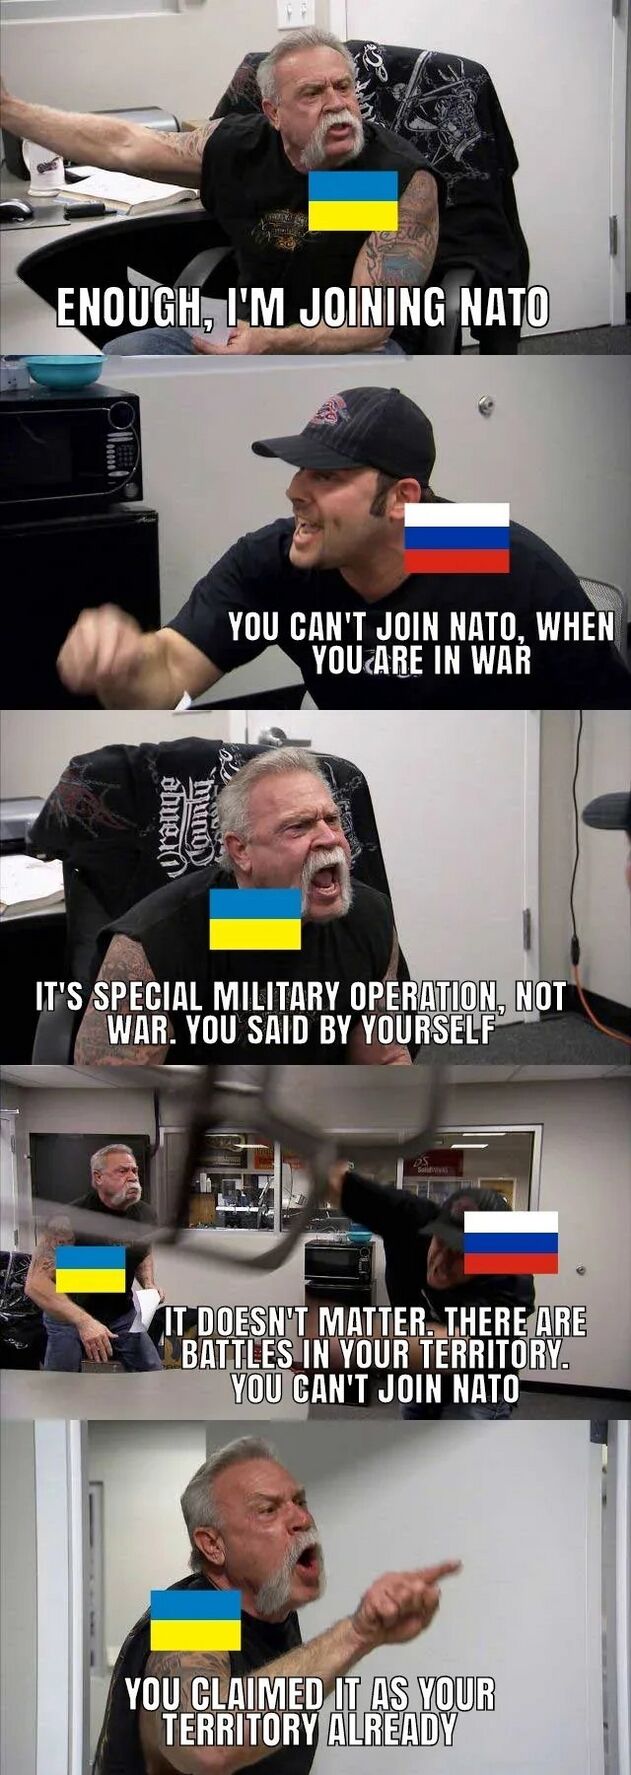 Ukraine Joins NATO During Special Operation.JPG